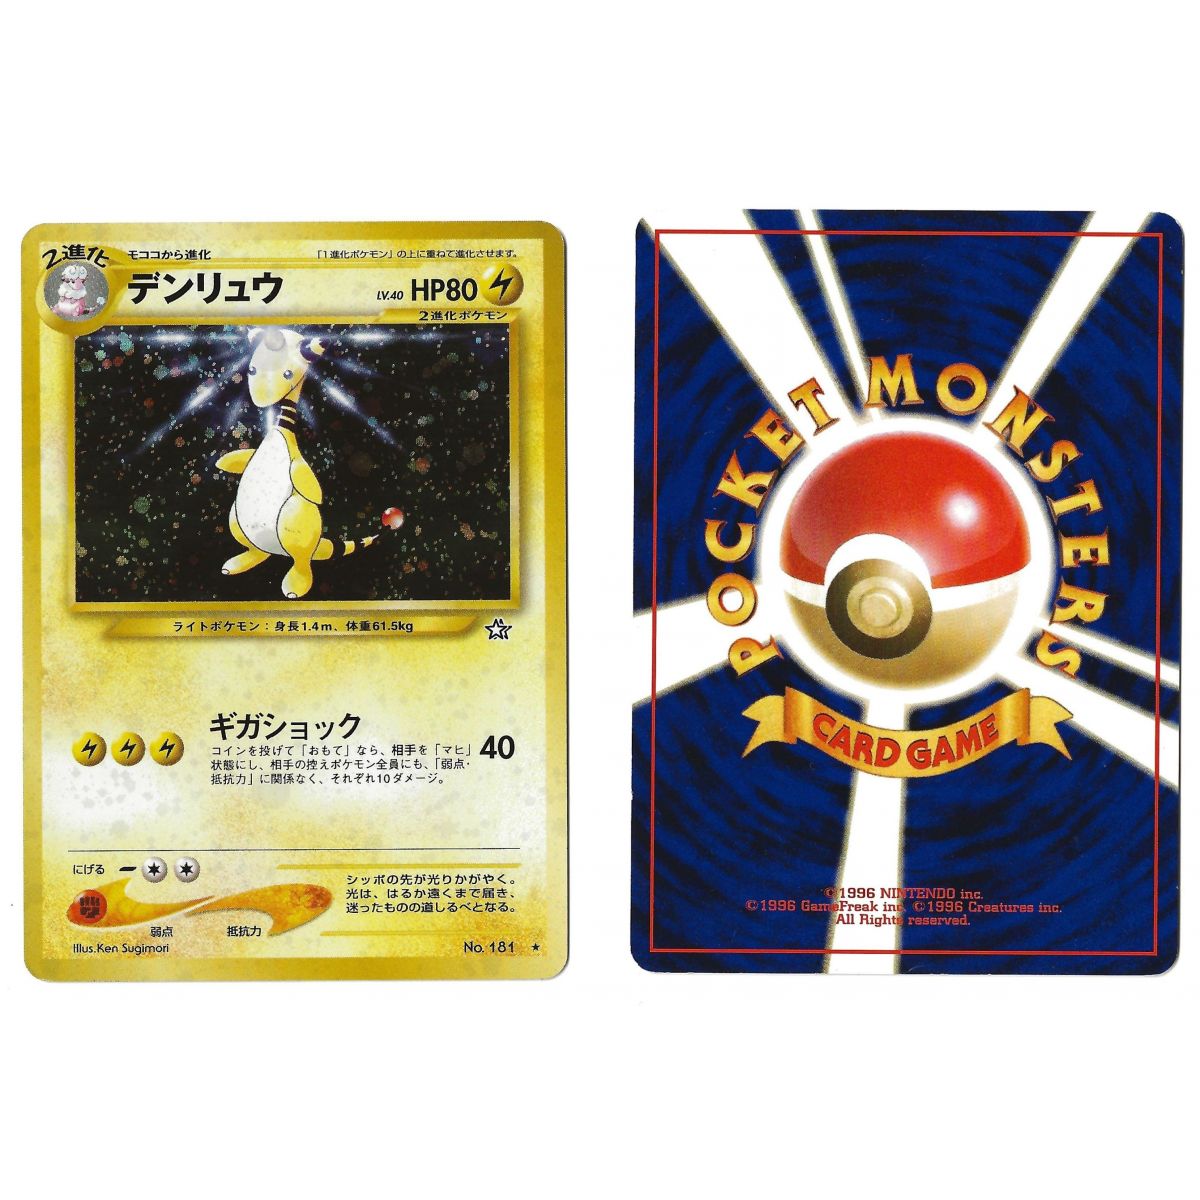 Ampharos (2) No.181 Gold, Silver, to a New World... N1 Holo Unlimited Japanese View Scan